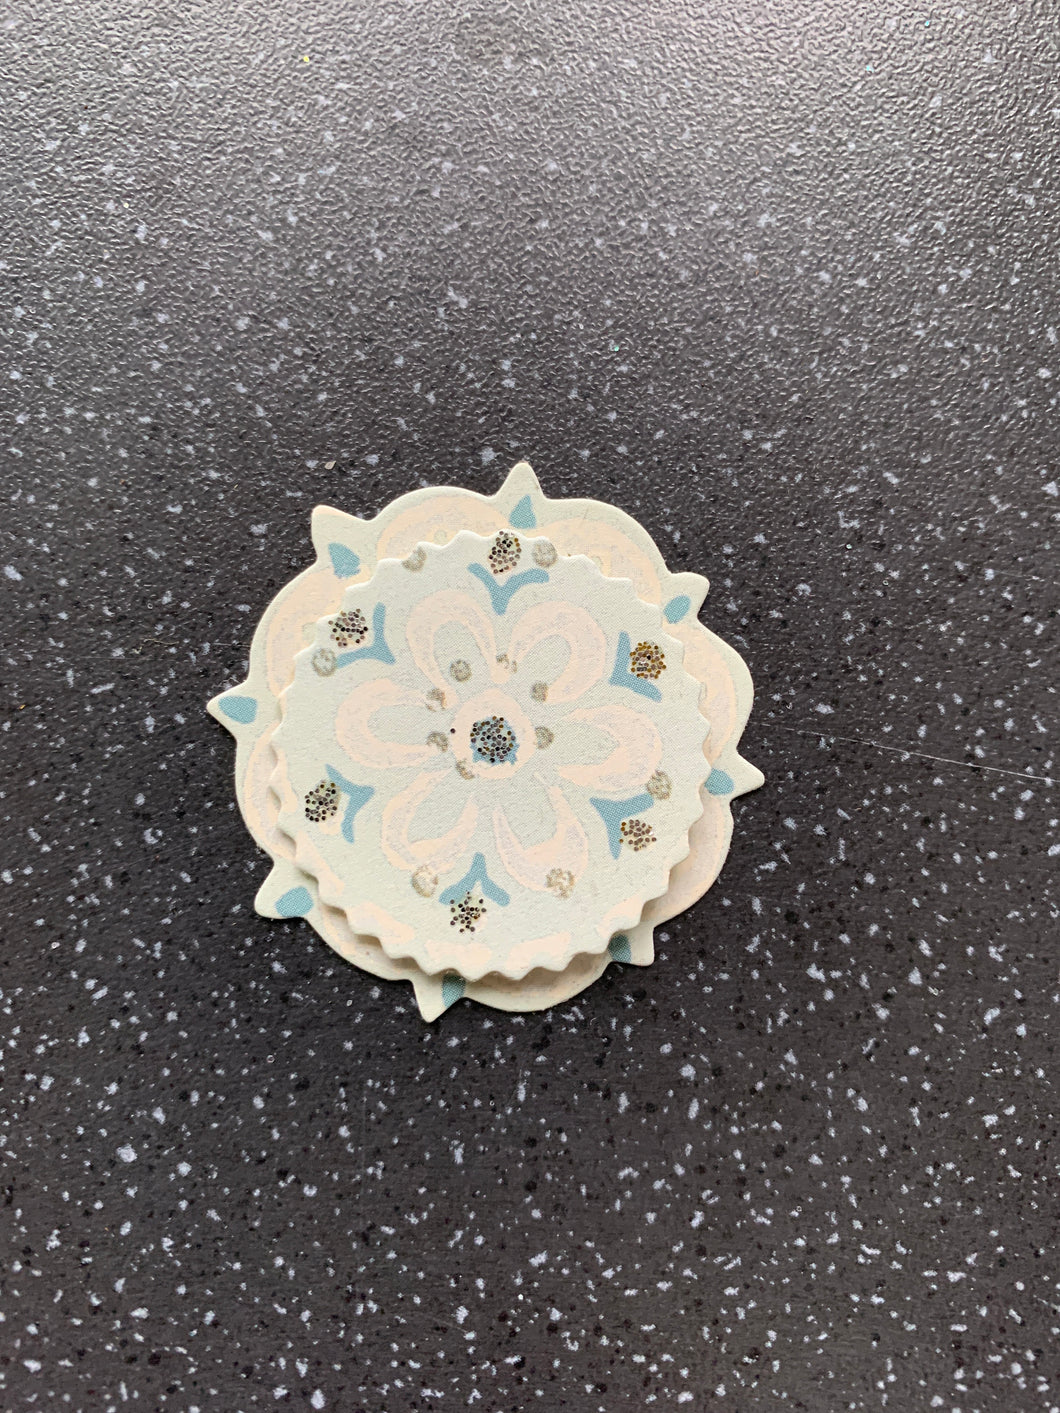 Manifest Love Blue Snowflake 3D Paper Circle Charm Beaded For Wallet or Under Pillow for Successful law of attraction manifestation